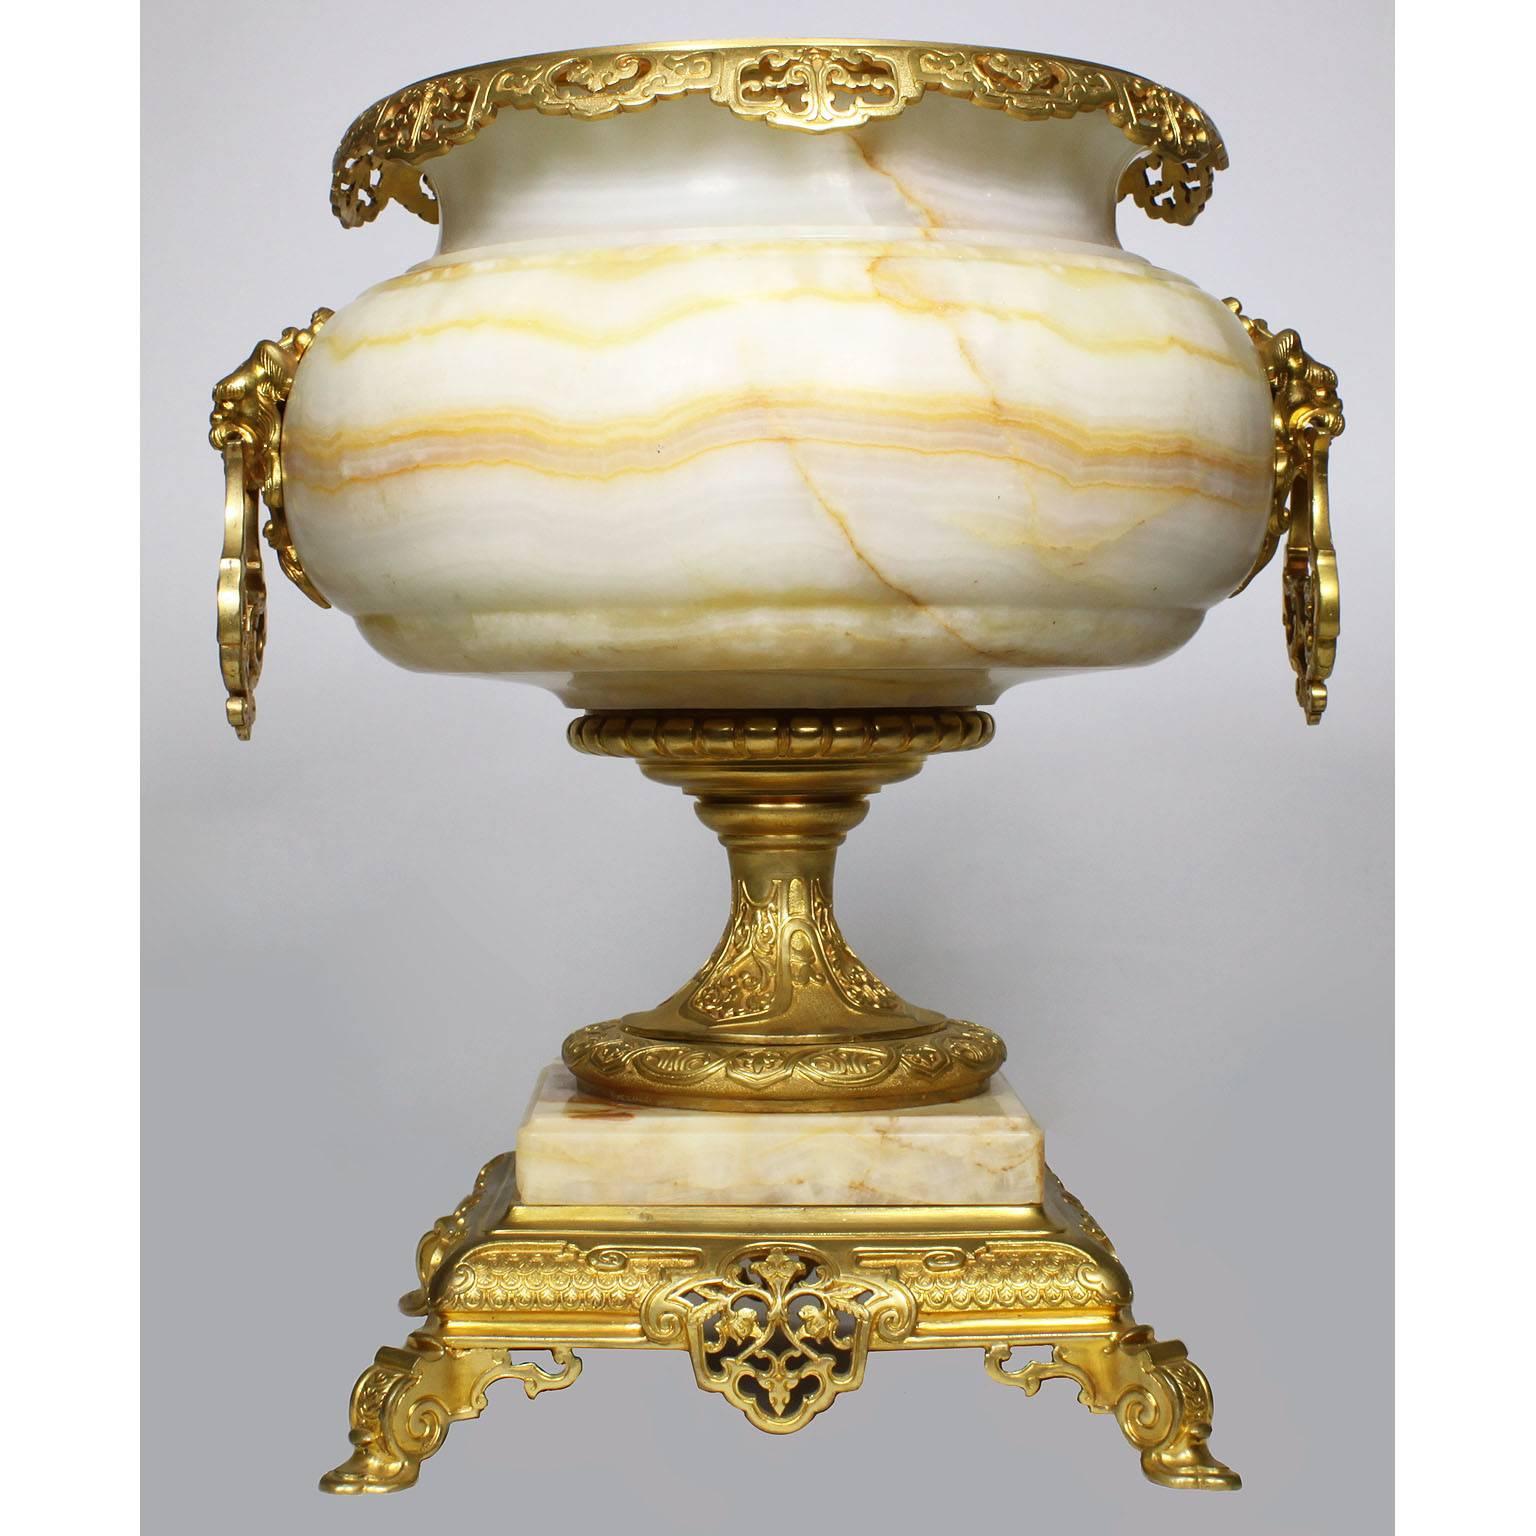 A large and impressive French 19th century onyx and ormolu-mounted Orientalist style figural urn, Attributed to Eugène Cornu (French, d. 1875) and G. Viot & Cie. The single ovoid onyx urn surmounted with lion masks attached to handles, the top rim